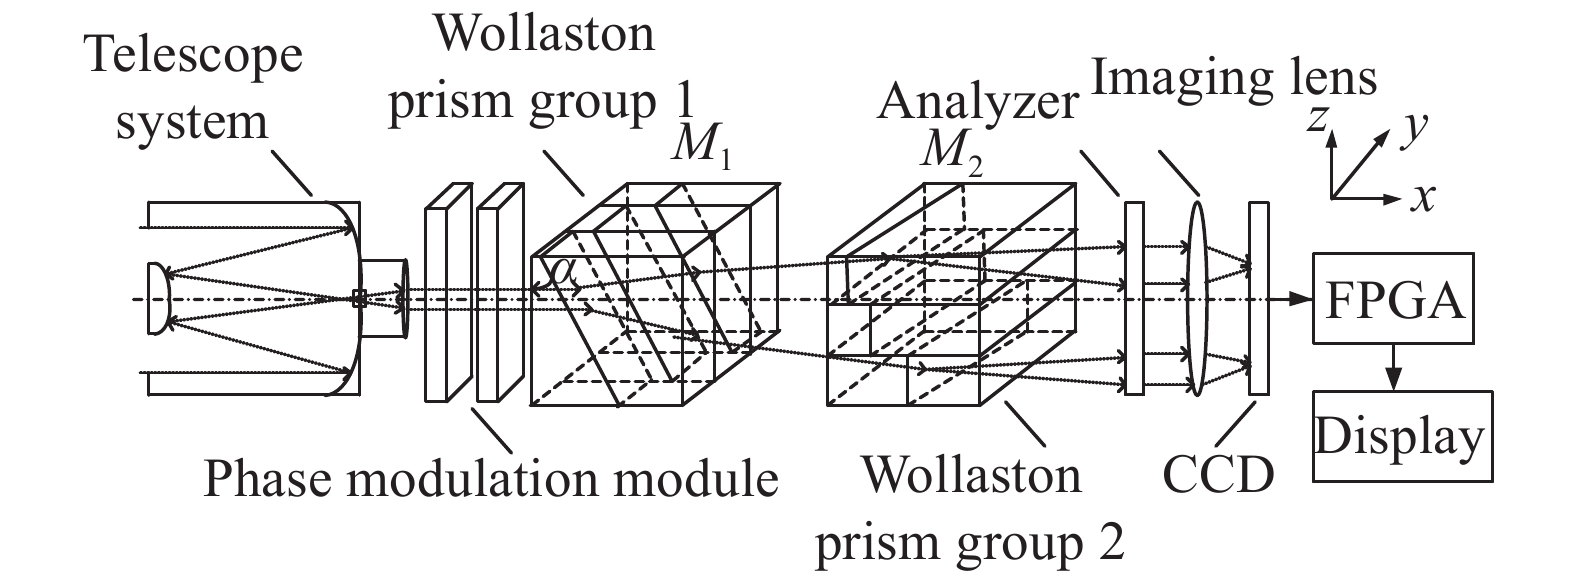 Polarization imaging system based on combined Wollaston prism